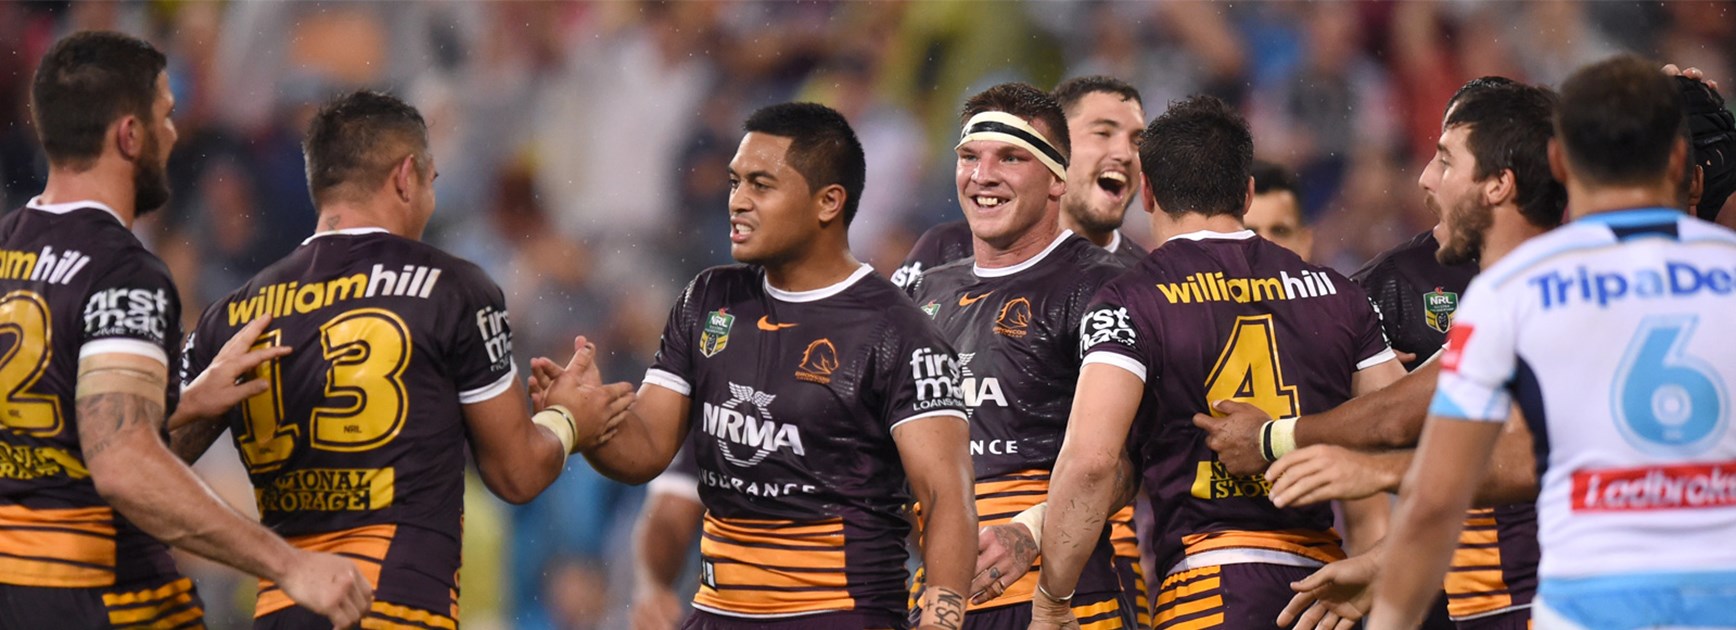 The Broncos celebrate their win over the Titans in the opening week of the finals series.